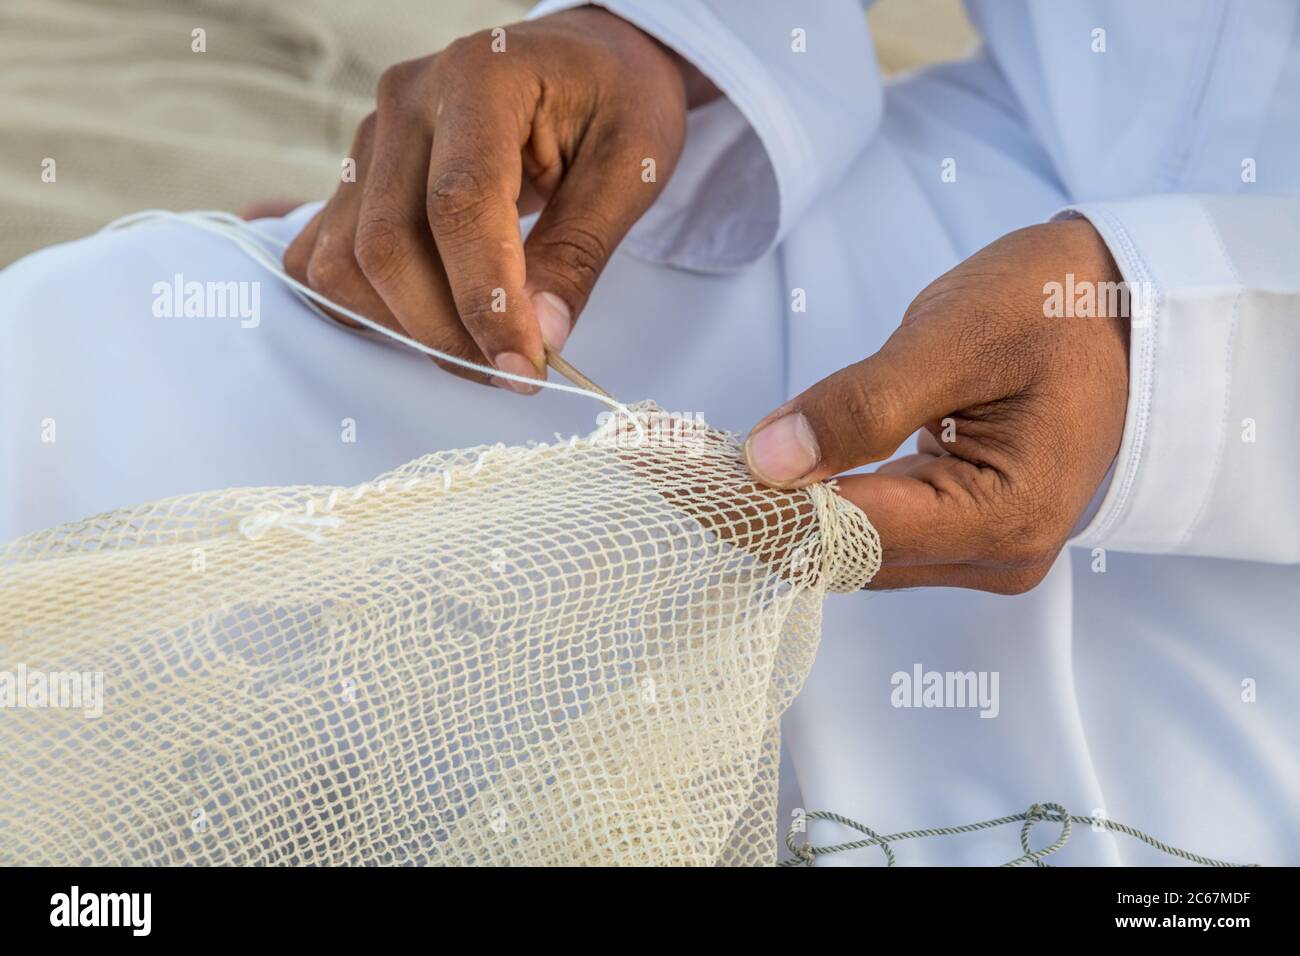 Close up image of the hands of Arabic man weaving fishnet 'fishing net' Stock Photo